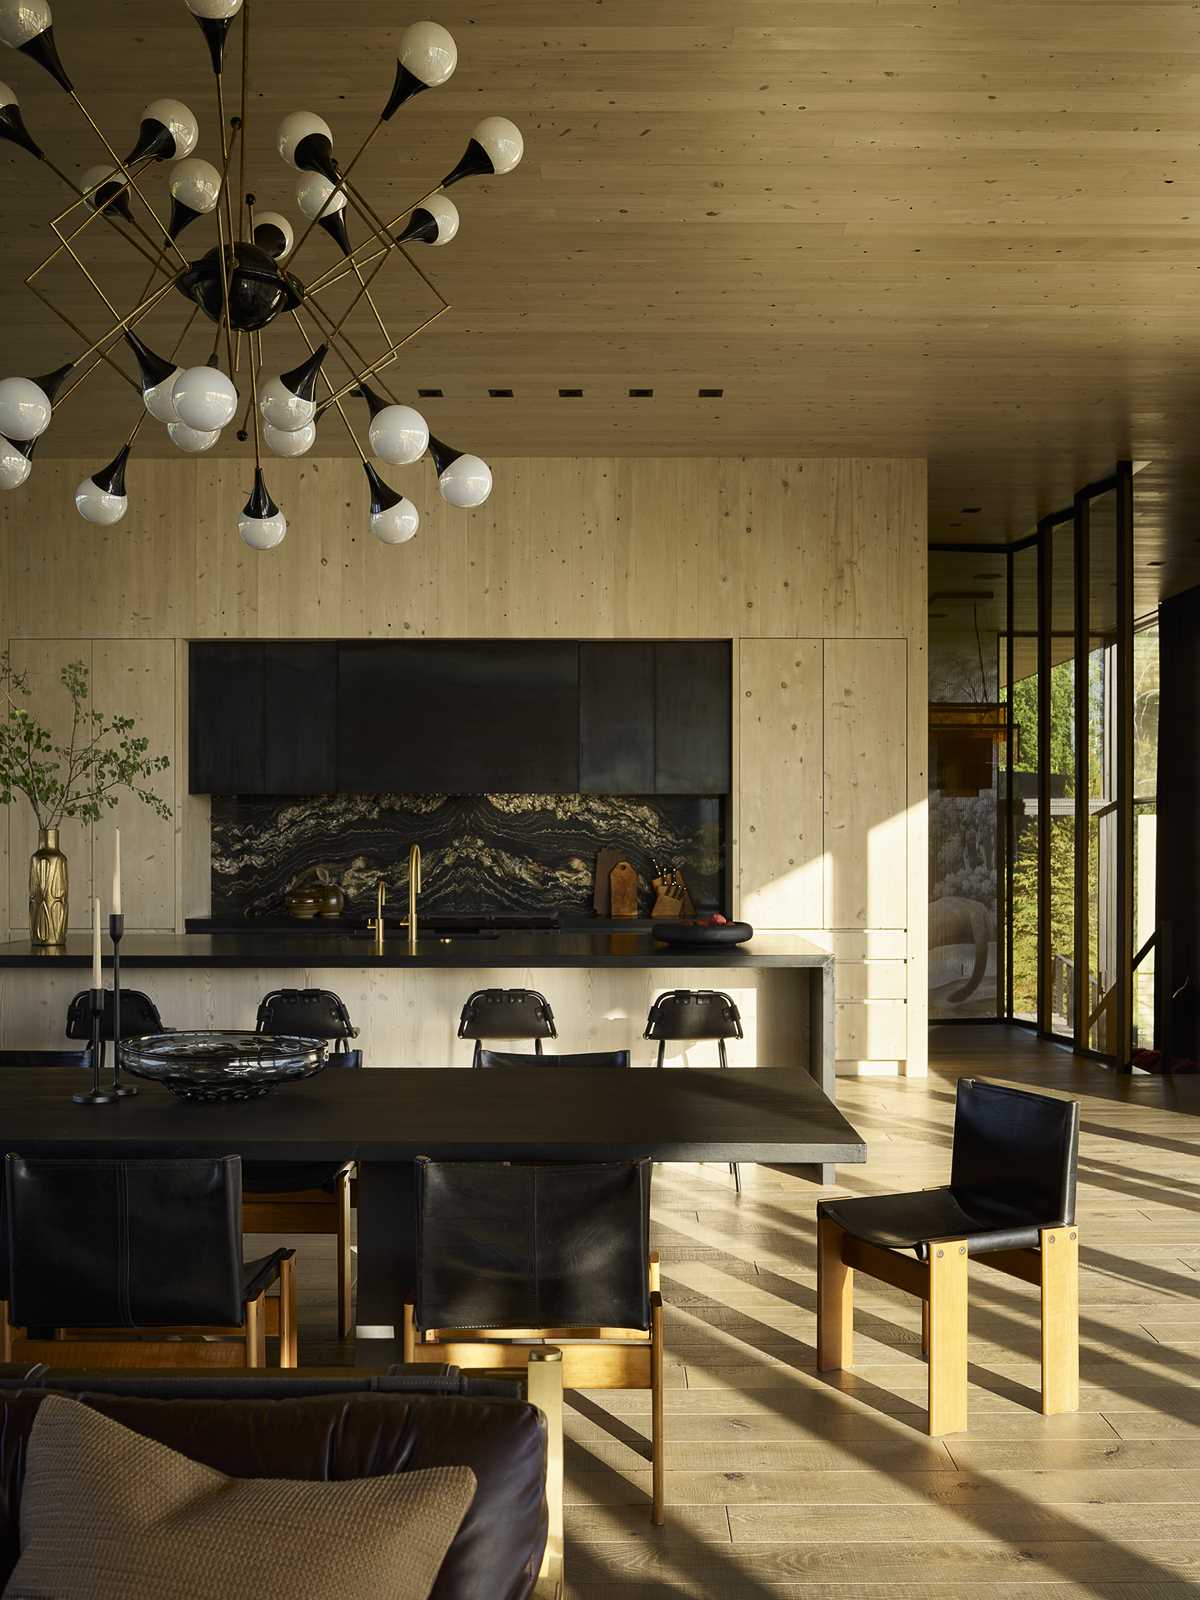 The dining room, which features a chandelier from Jean-Marc Frey, separates the living room from the kitchen.